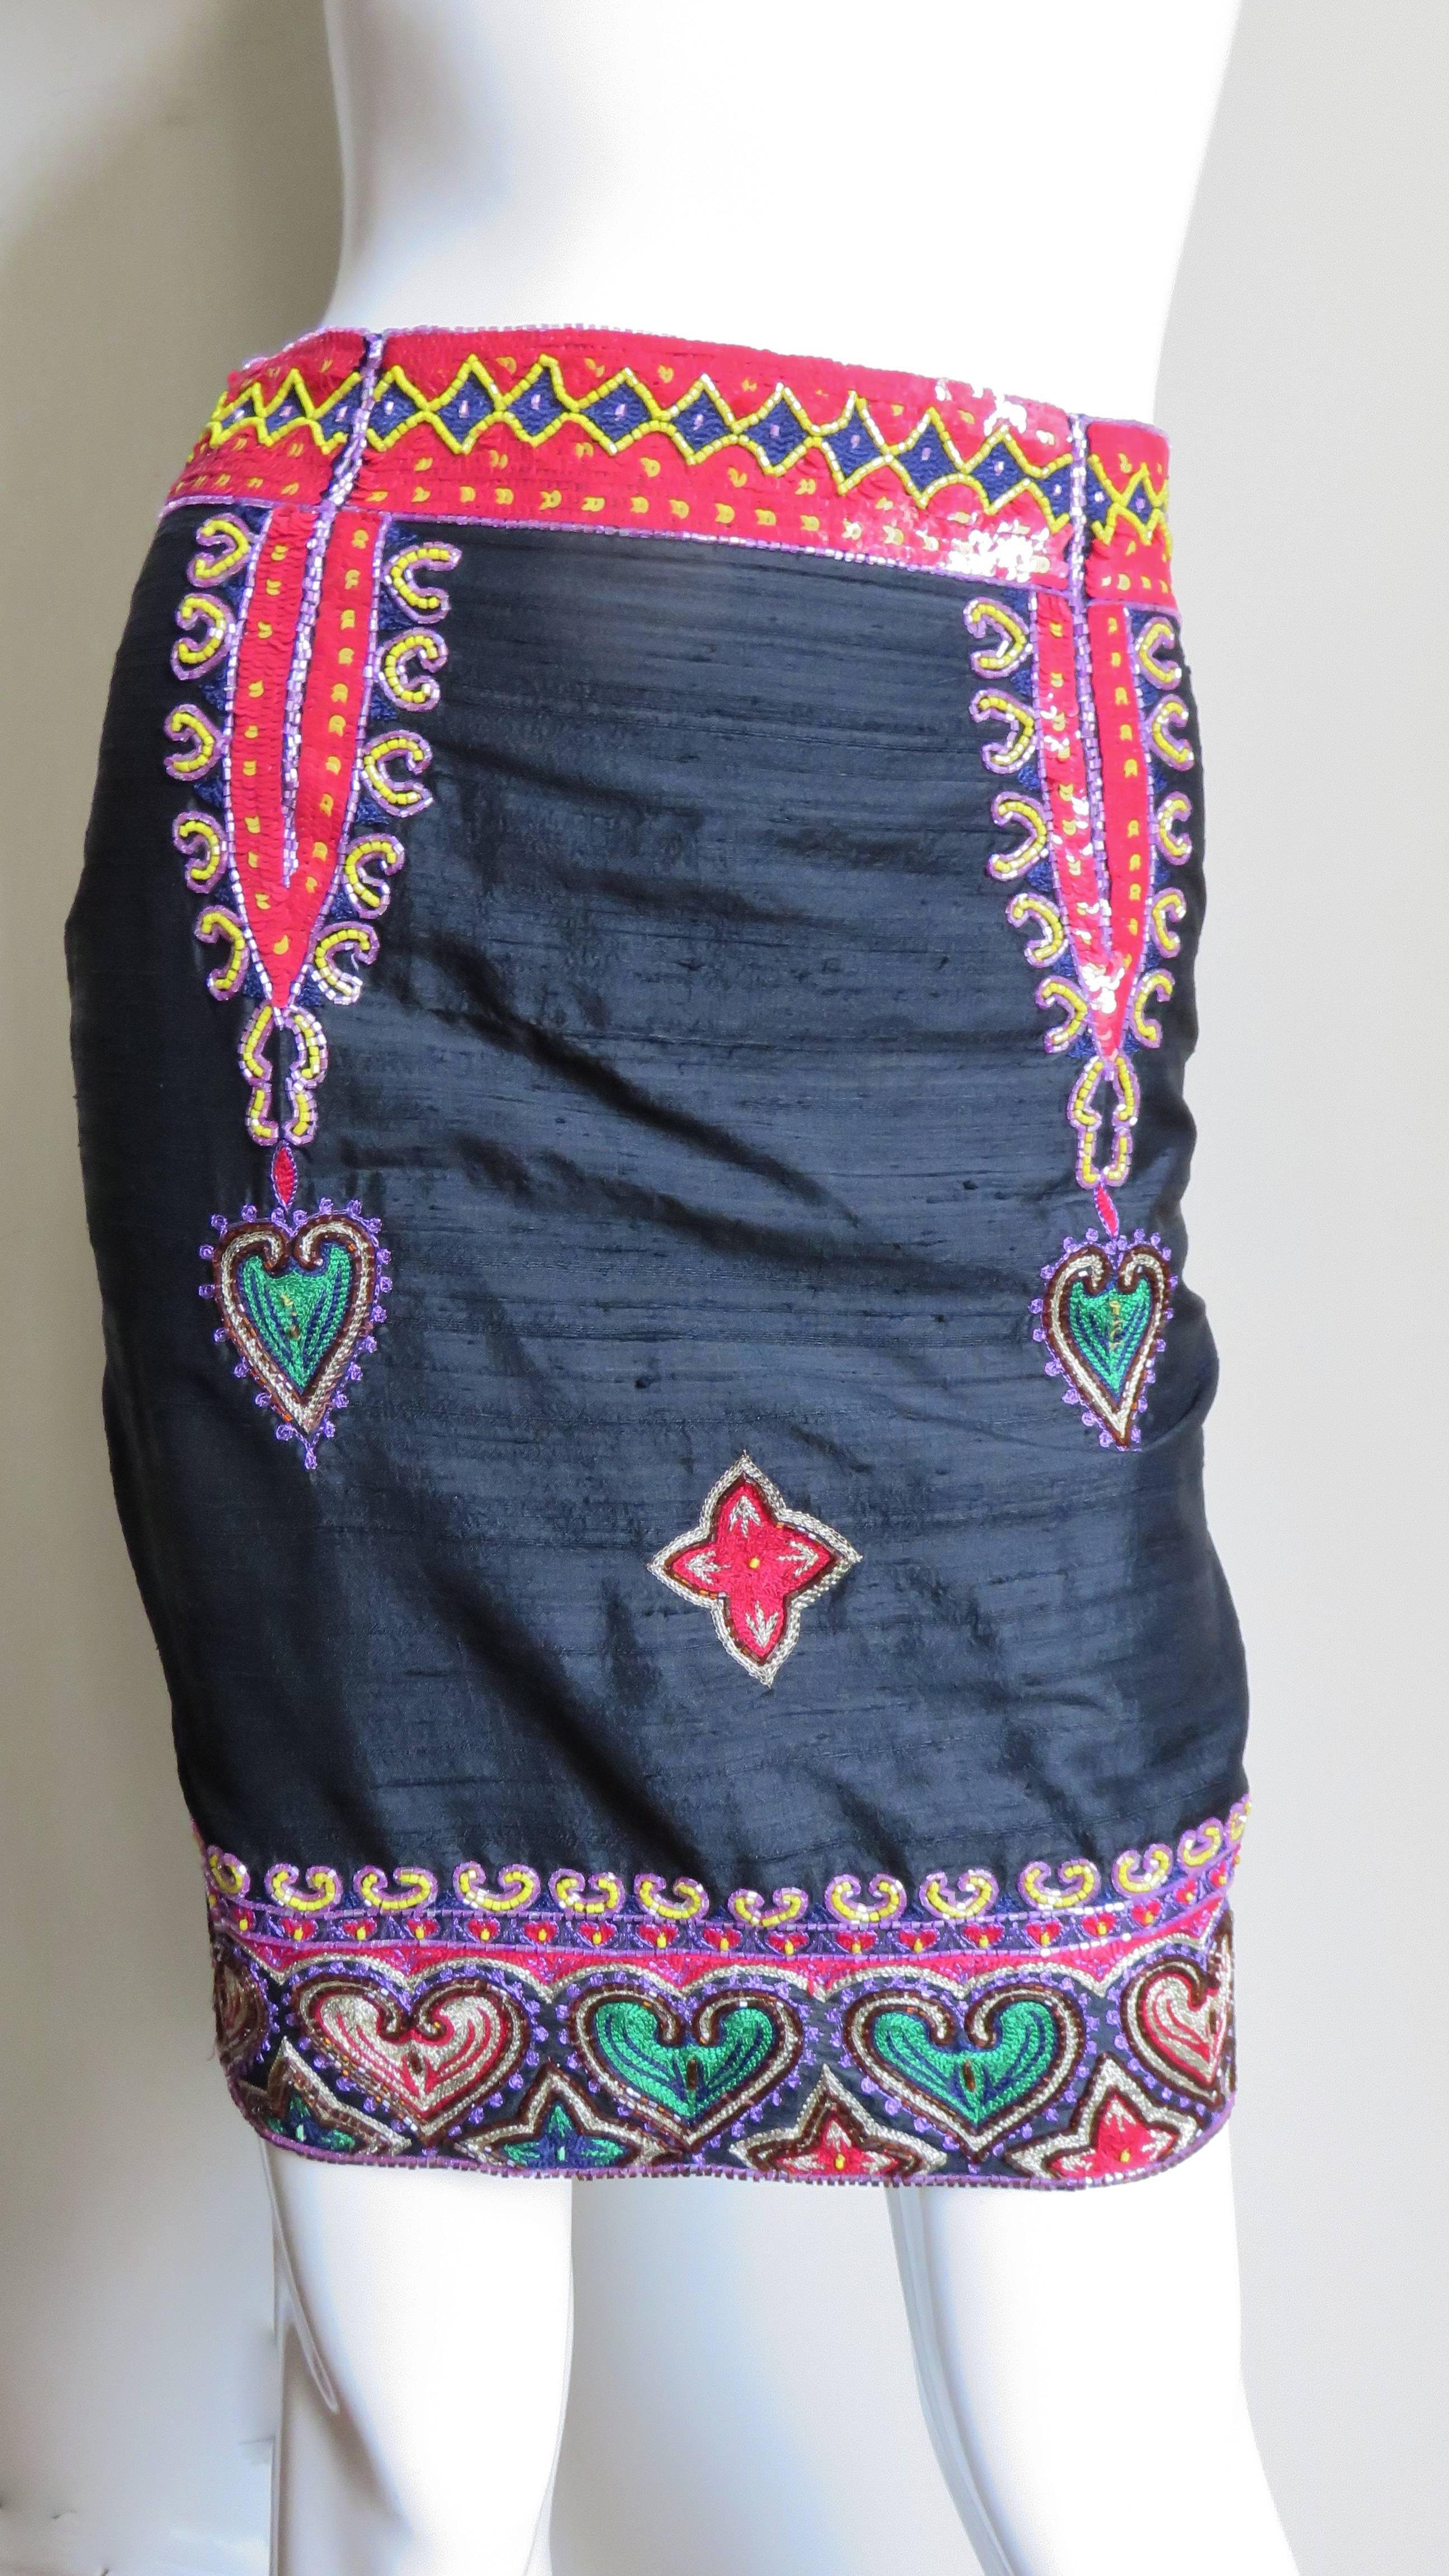 A beautiful black silk skirt trimmed in red sequin and embroidered hearts framed in an intricate beaded design.  It has a 2